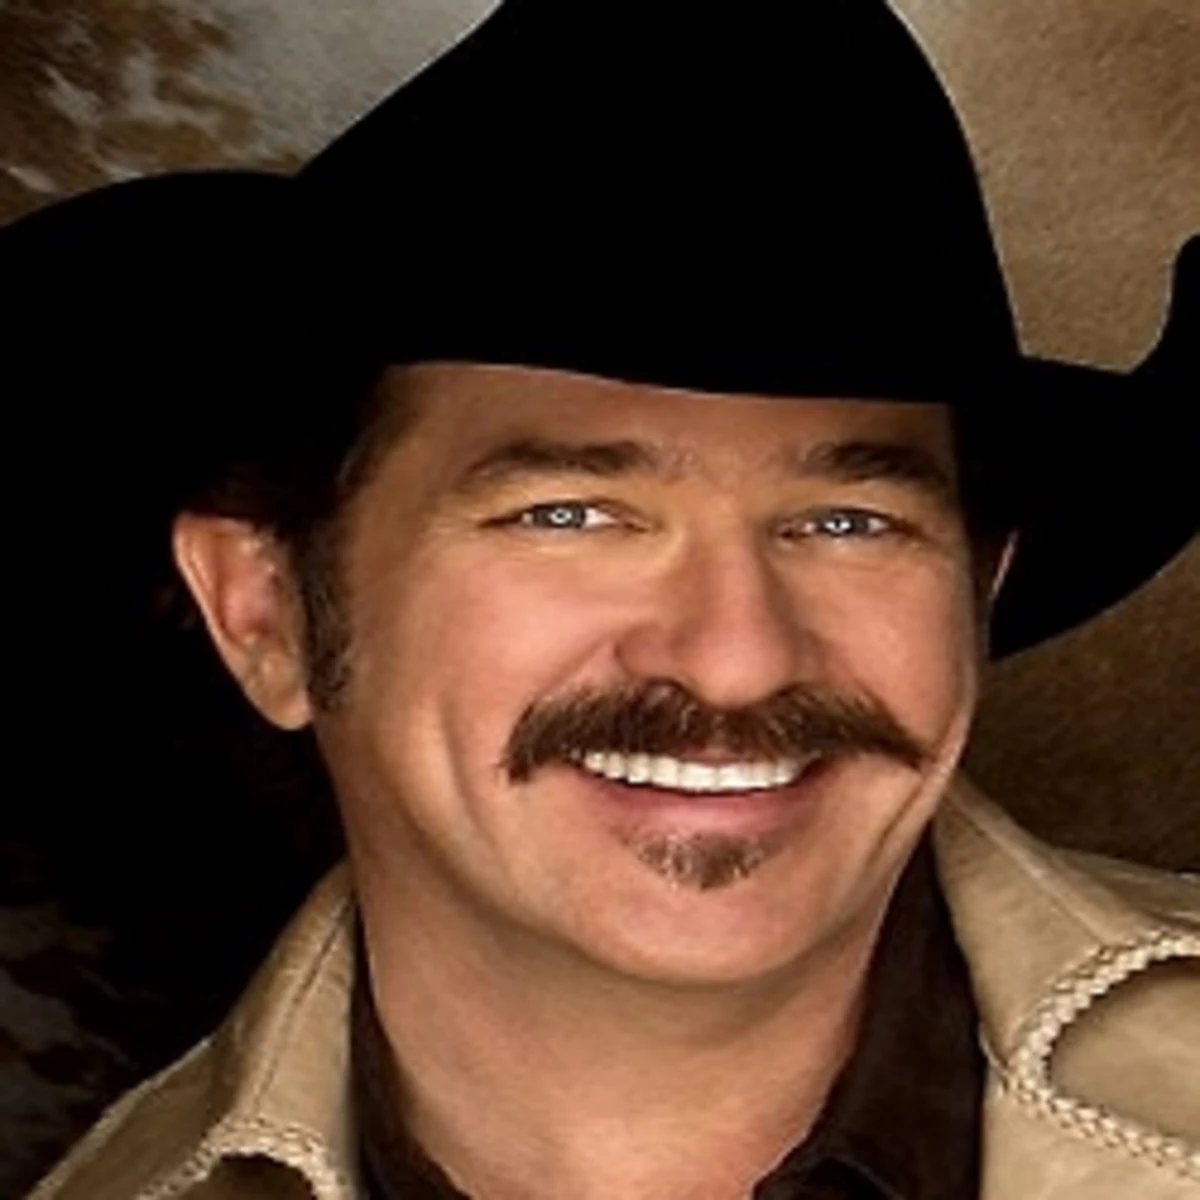 American Country Countdown With Kix Brooks - LISTEN LIVE STREAM